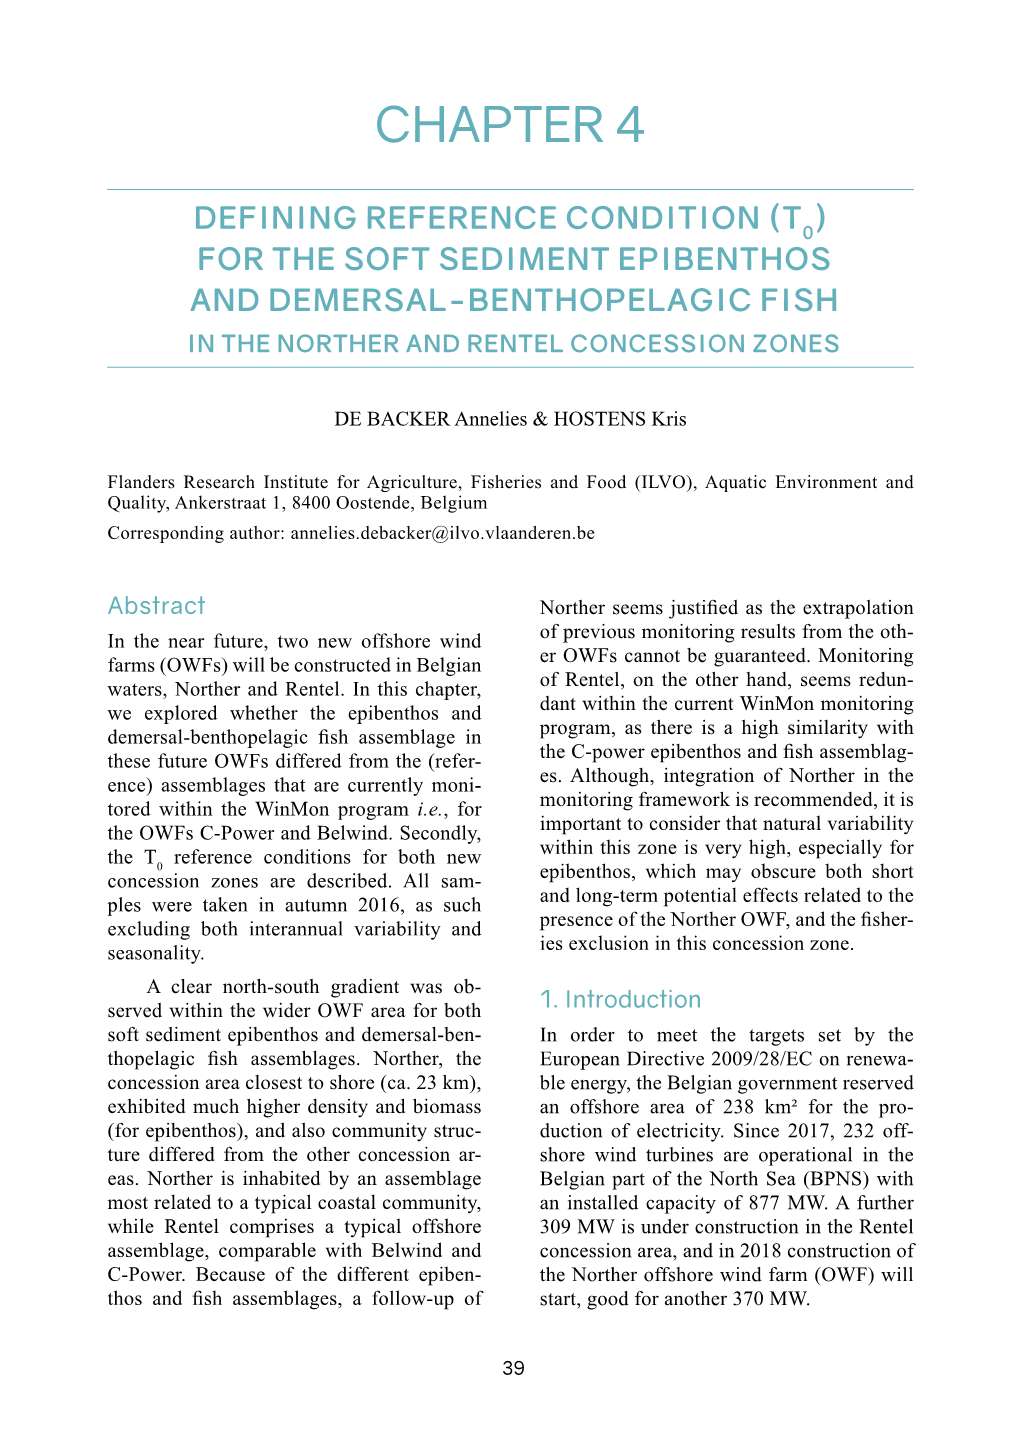 Defining Reference Condition (T0) for the Soft Sediment Epibenthos and Demersal-Benthopelagic Fish in the Norther and Rentel Concession Zones